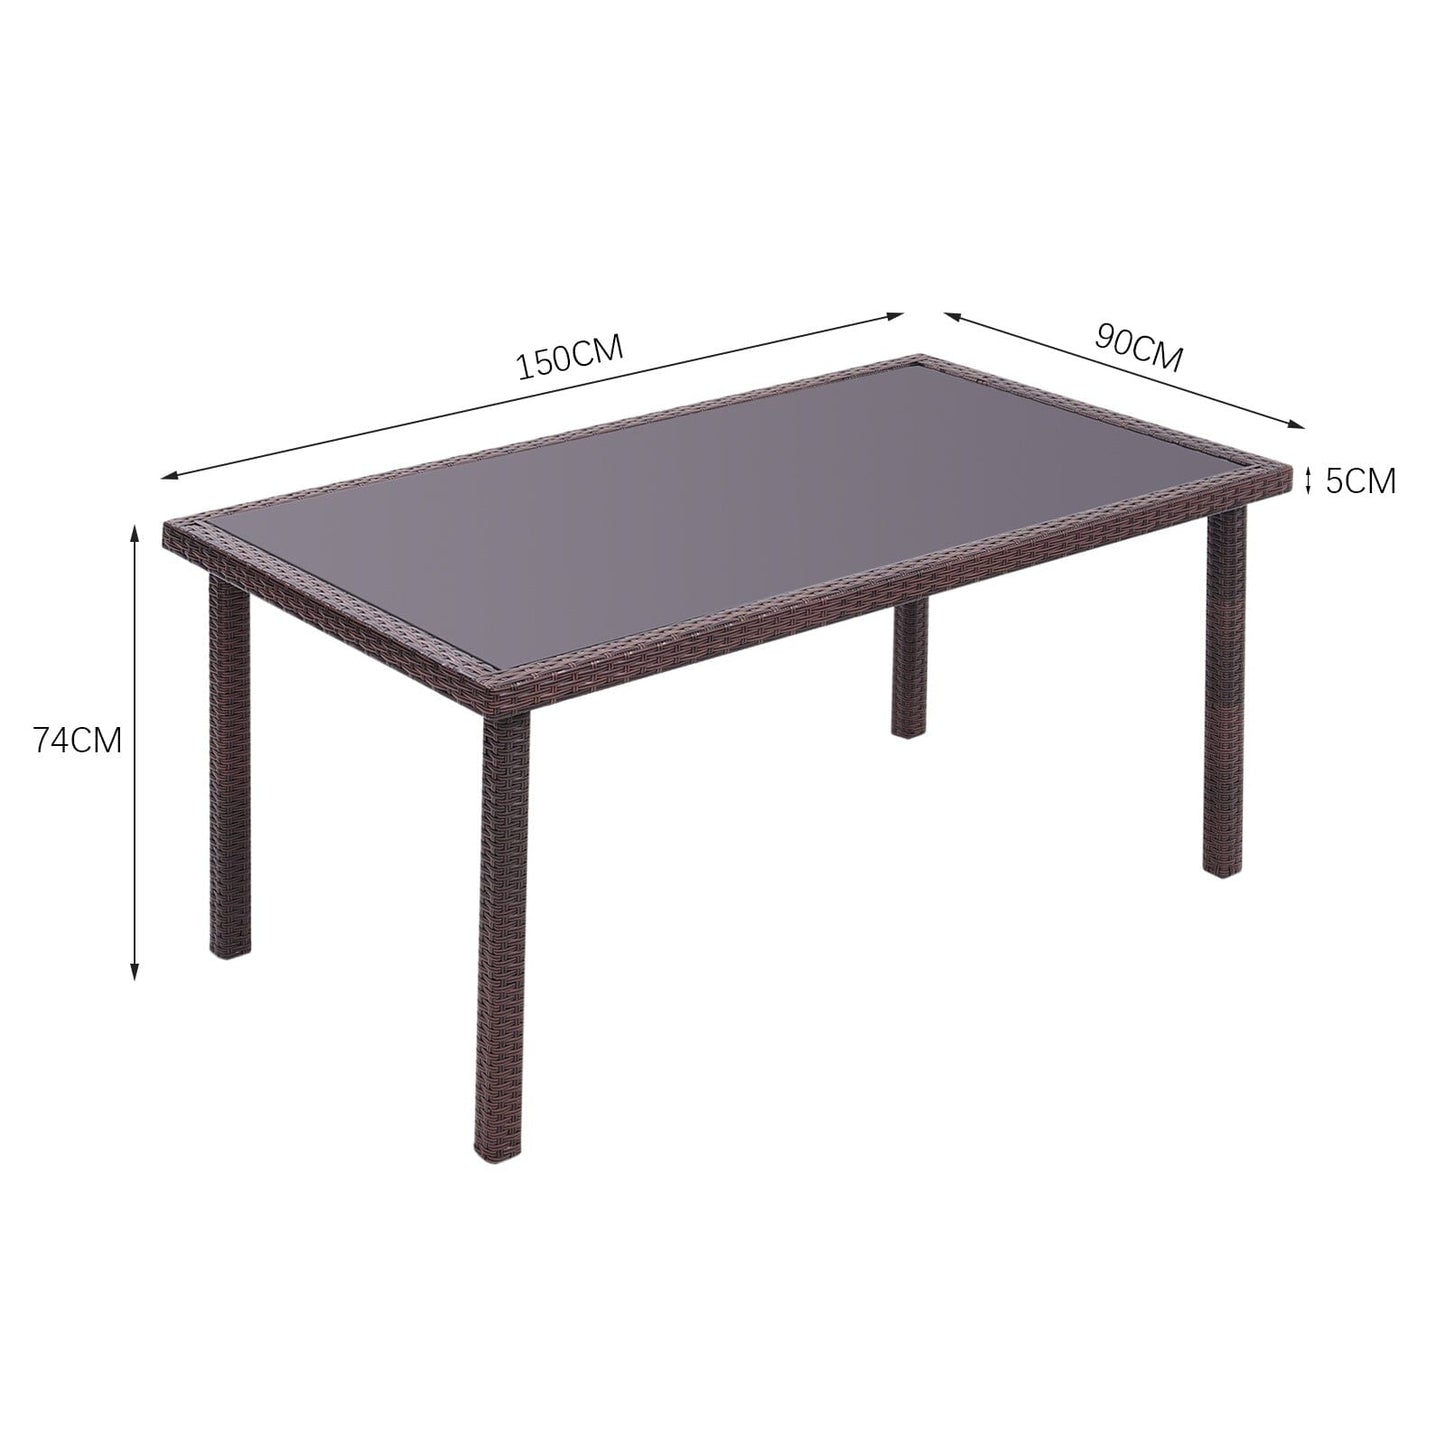 150cm Width Garden Table Dining Patio Outdoor Table Rectangle Table Black/Brown